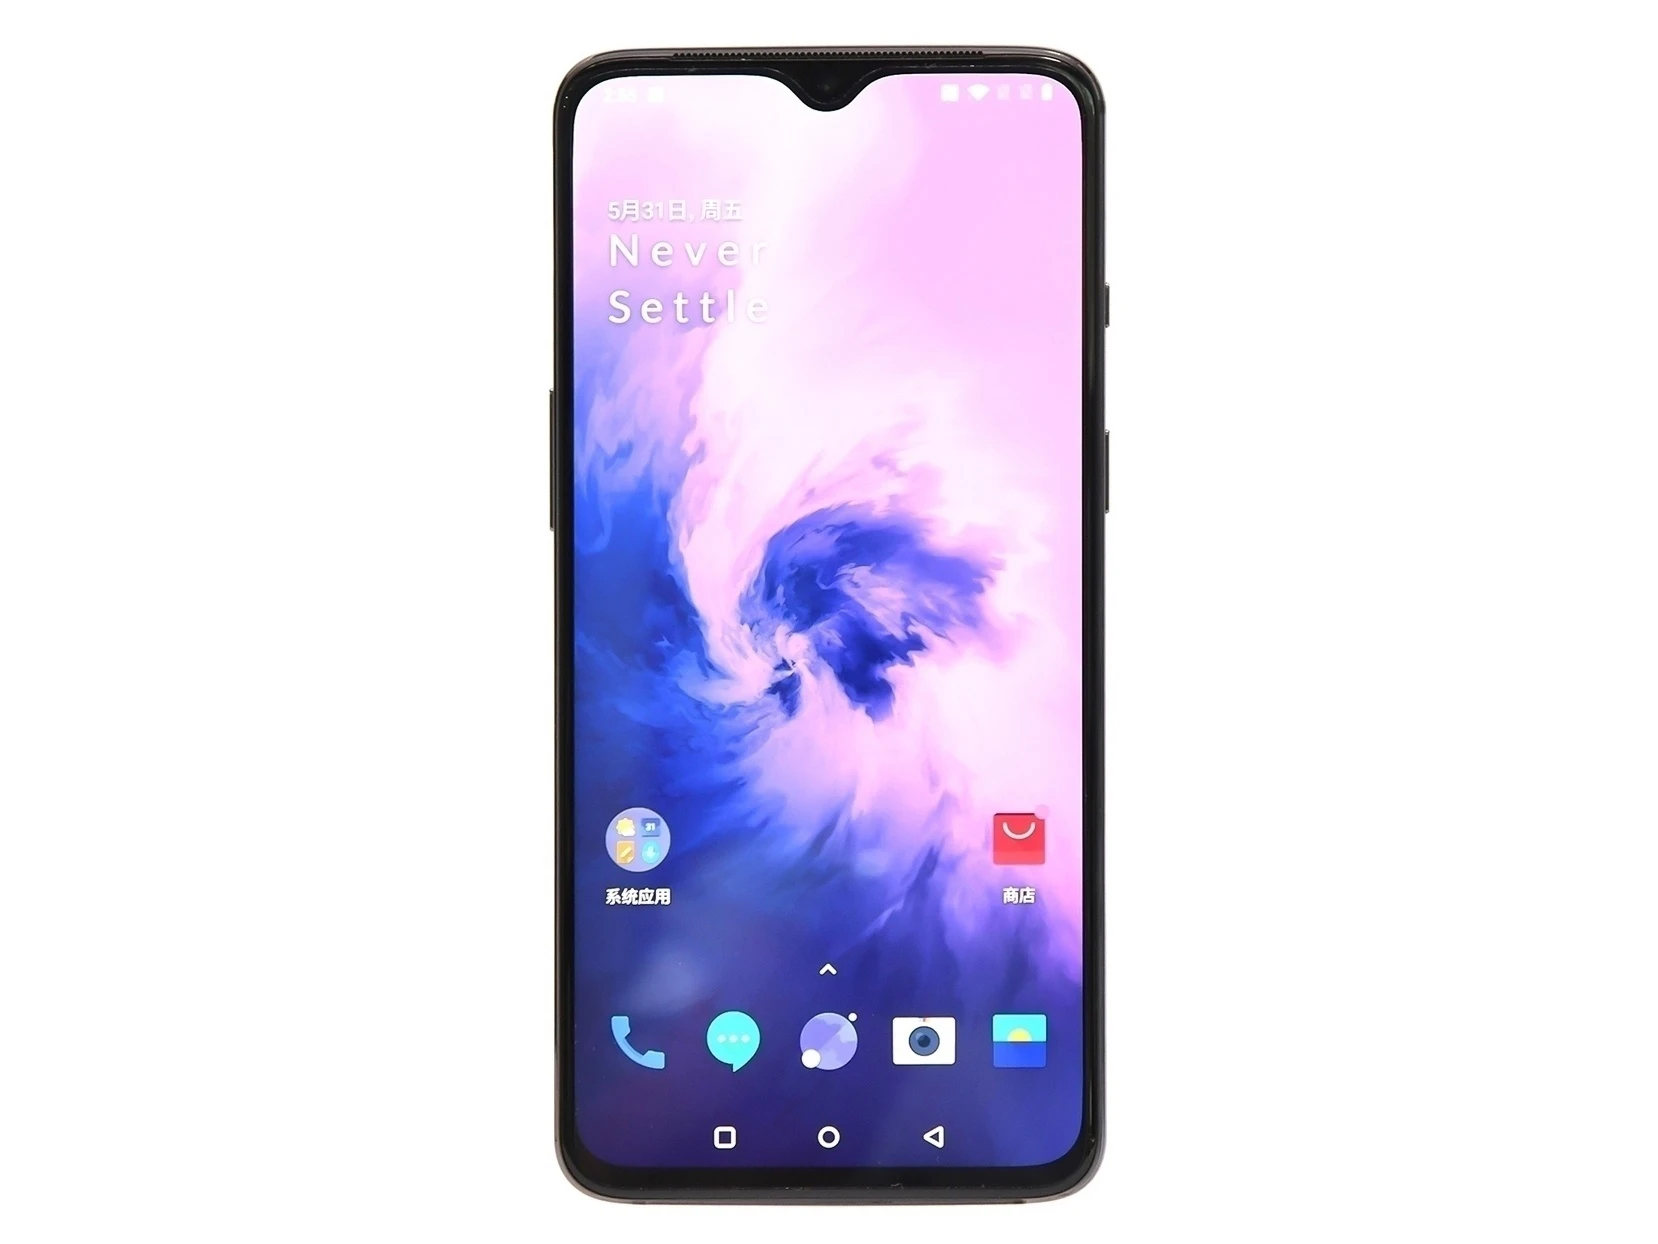 top oneplus phones Global ROM Oneplus 7 12GB 256GB Smartphone Snapdragon 855 Octa Core 6.41" AMOLED 48MP+16MP Dual Cameras NFC 3700mAh Mobile Phone oneplus cheap phone